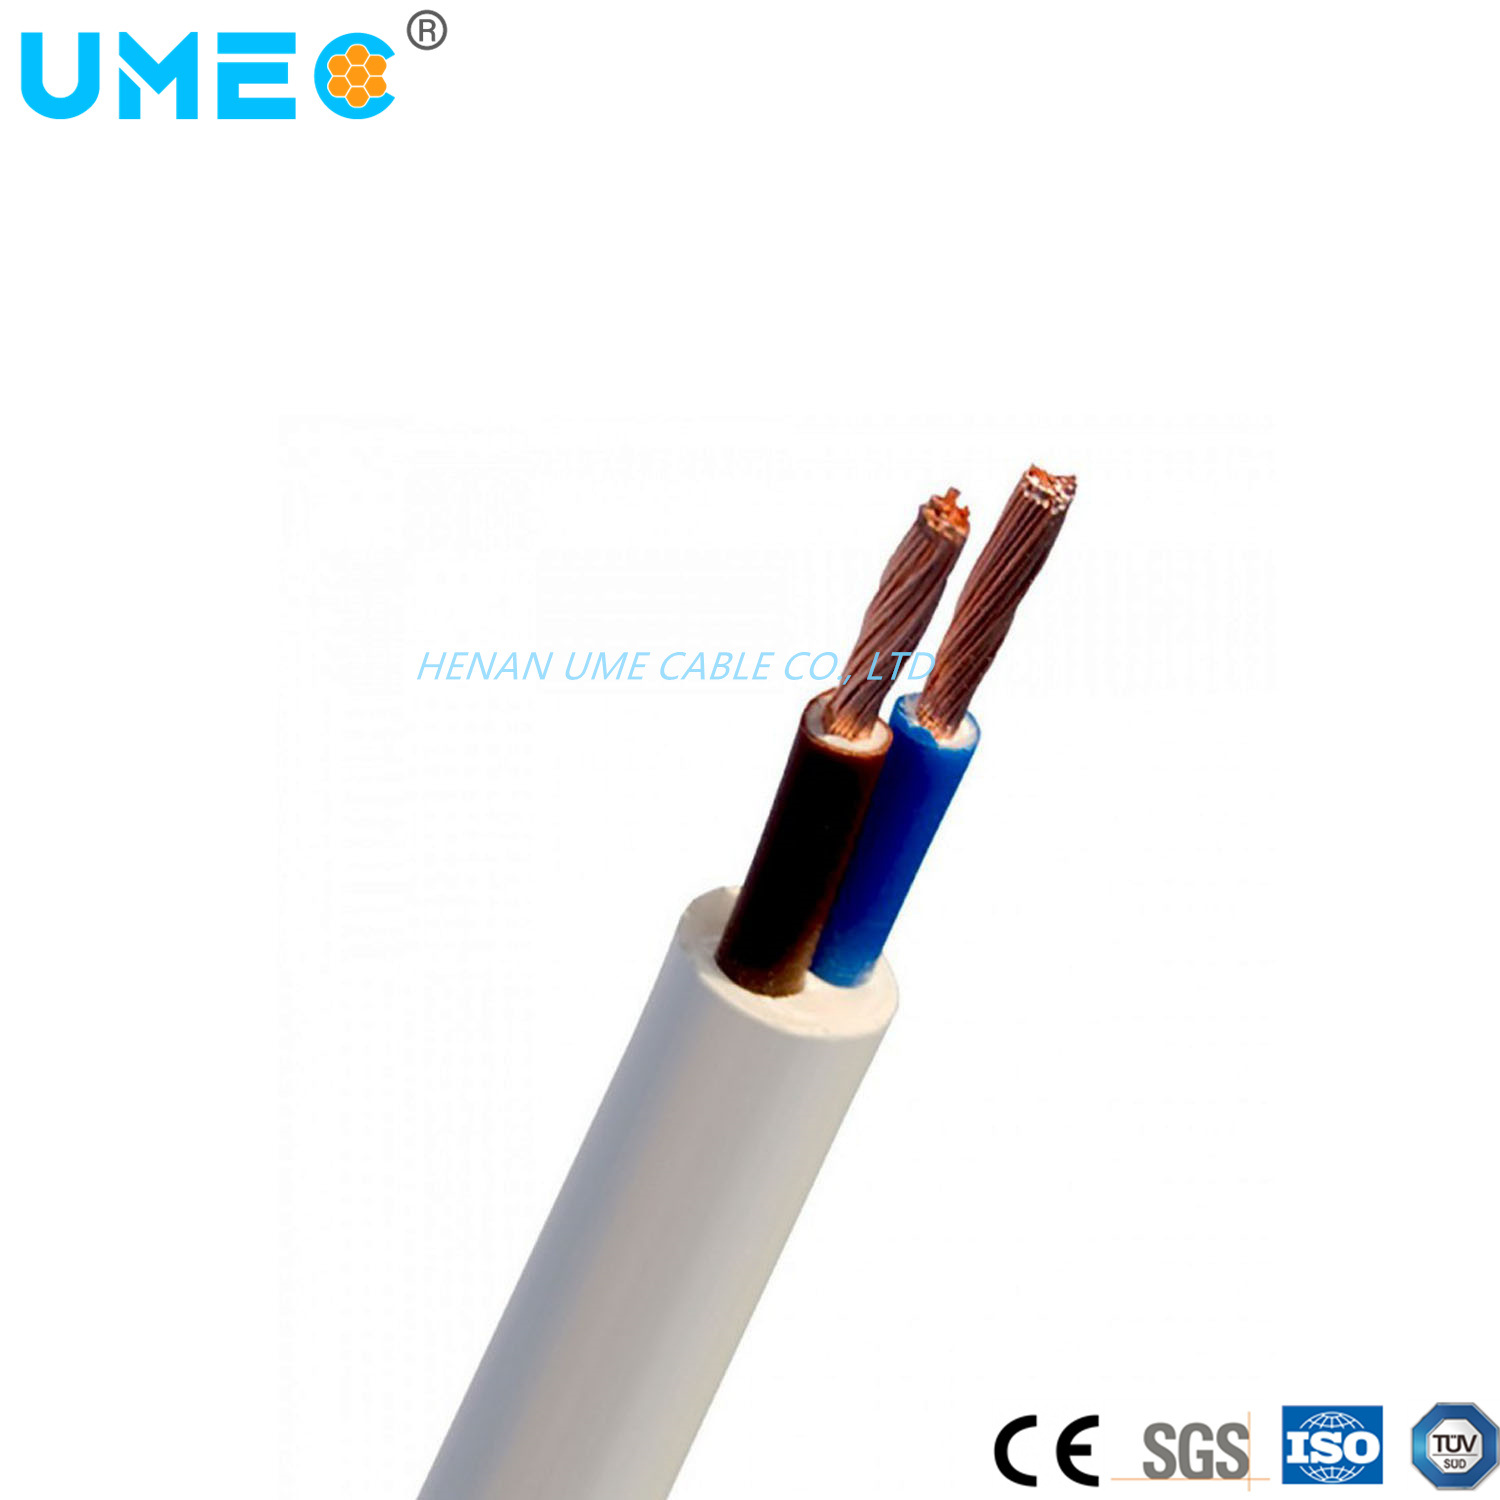 300/500V Electrical Wire H05VV-F Power Cable Myym Cable 0.75 2cx0.75 3cx0.75 3cx1.5mm2 Cable